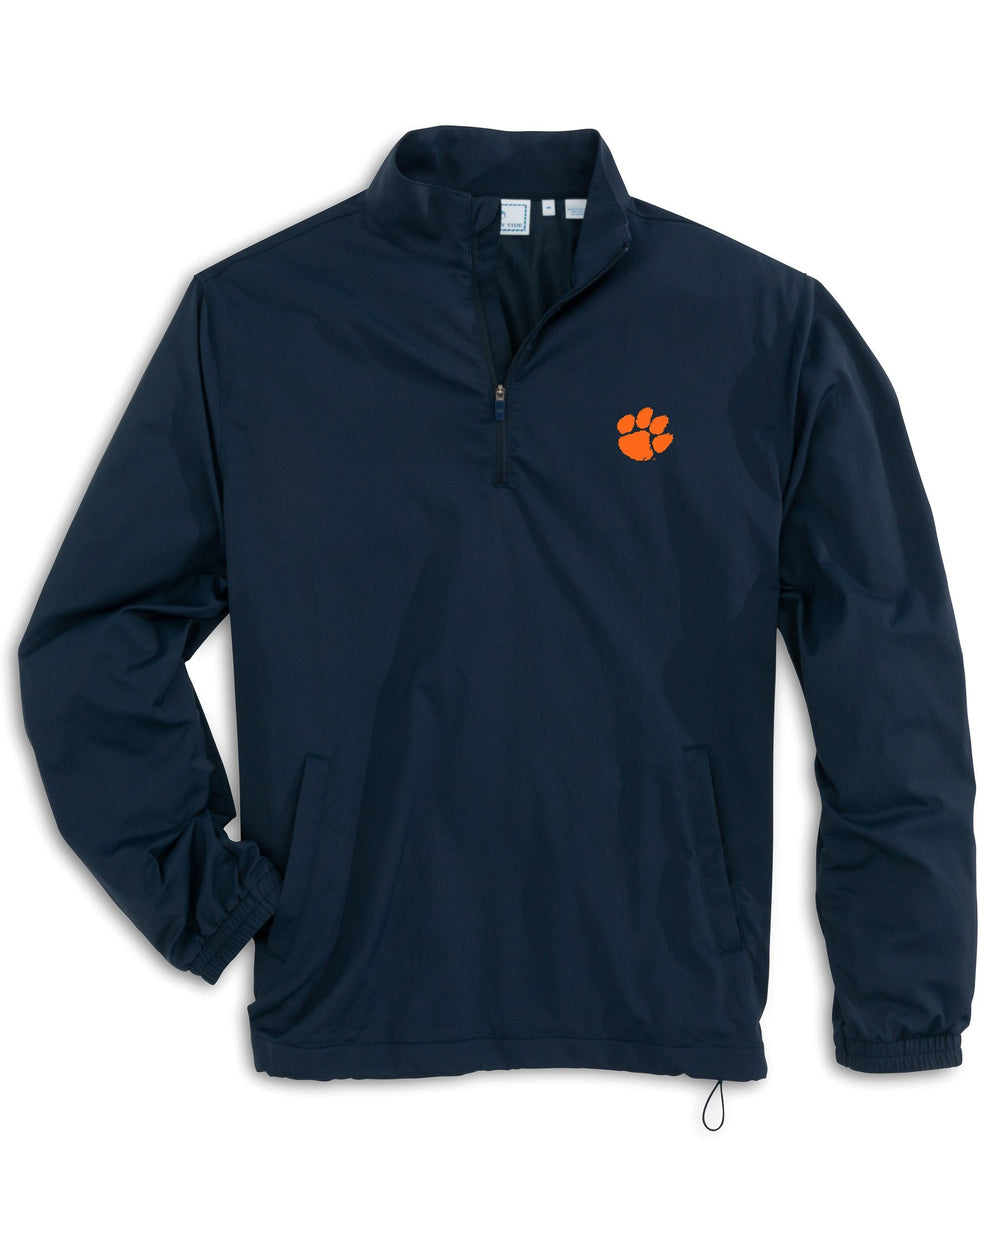 The front of the Men's Clemson Tigers Intercoastal Quarter Zip Pullover by Southern Tide - Dark Navy